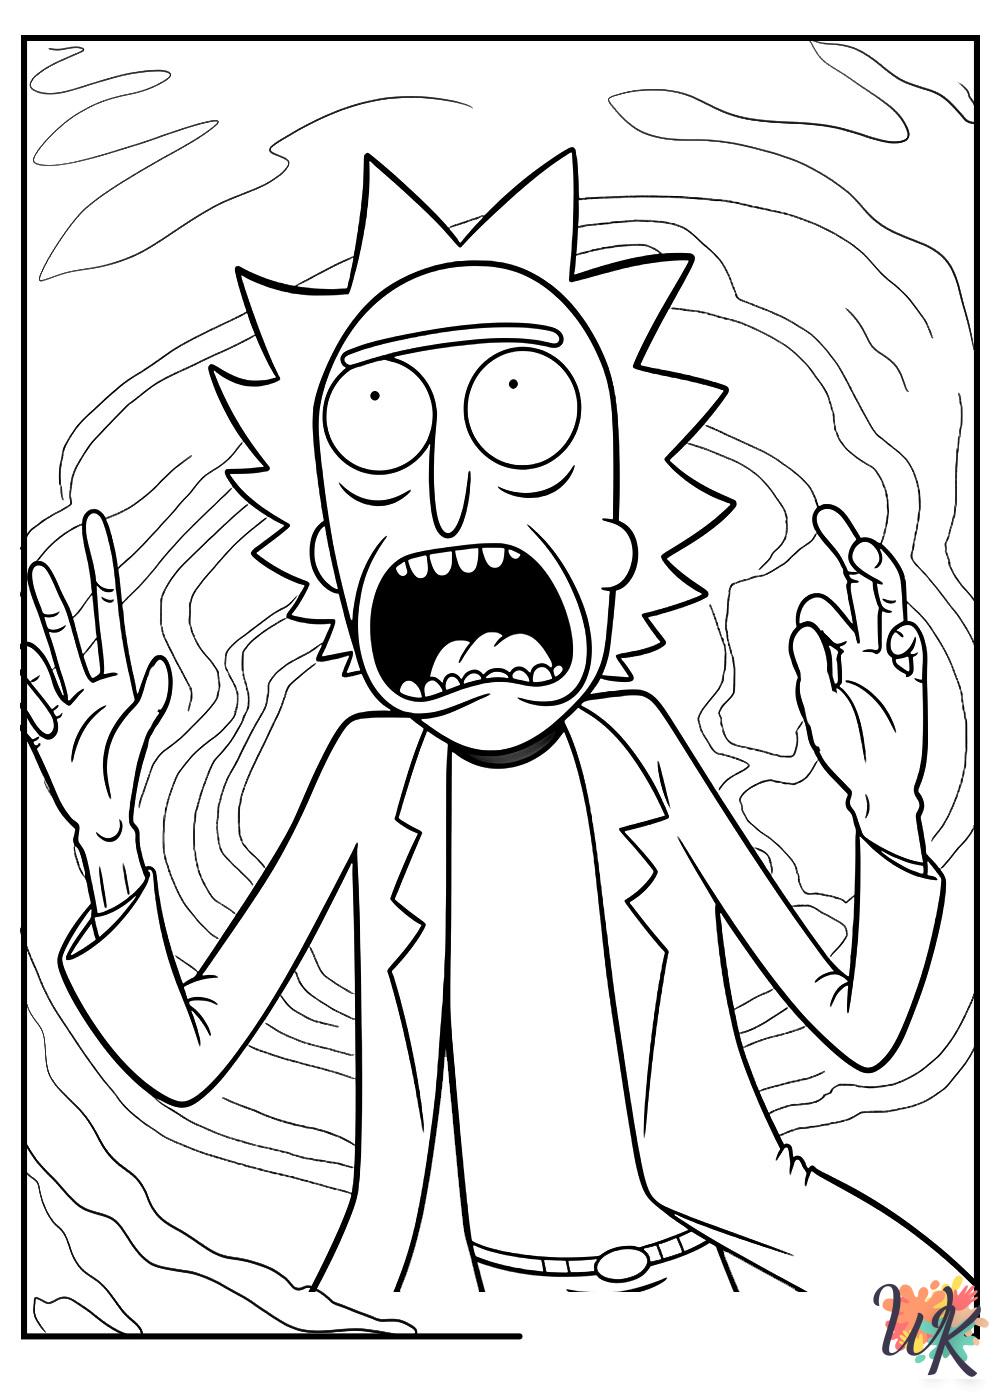 easy Rick and Morty coloring pages